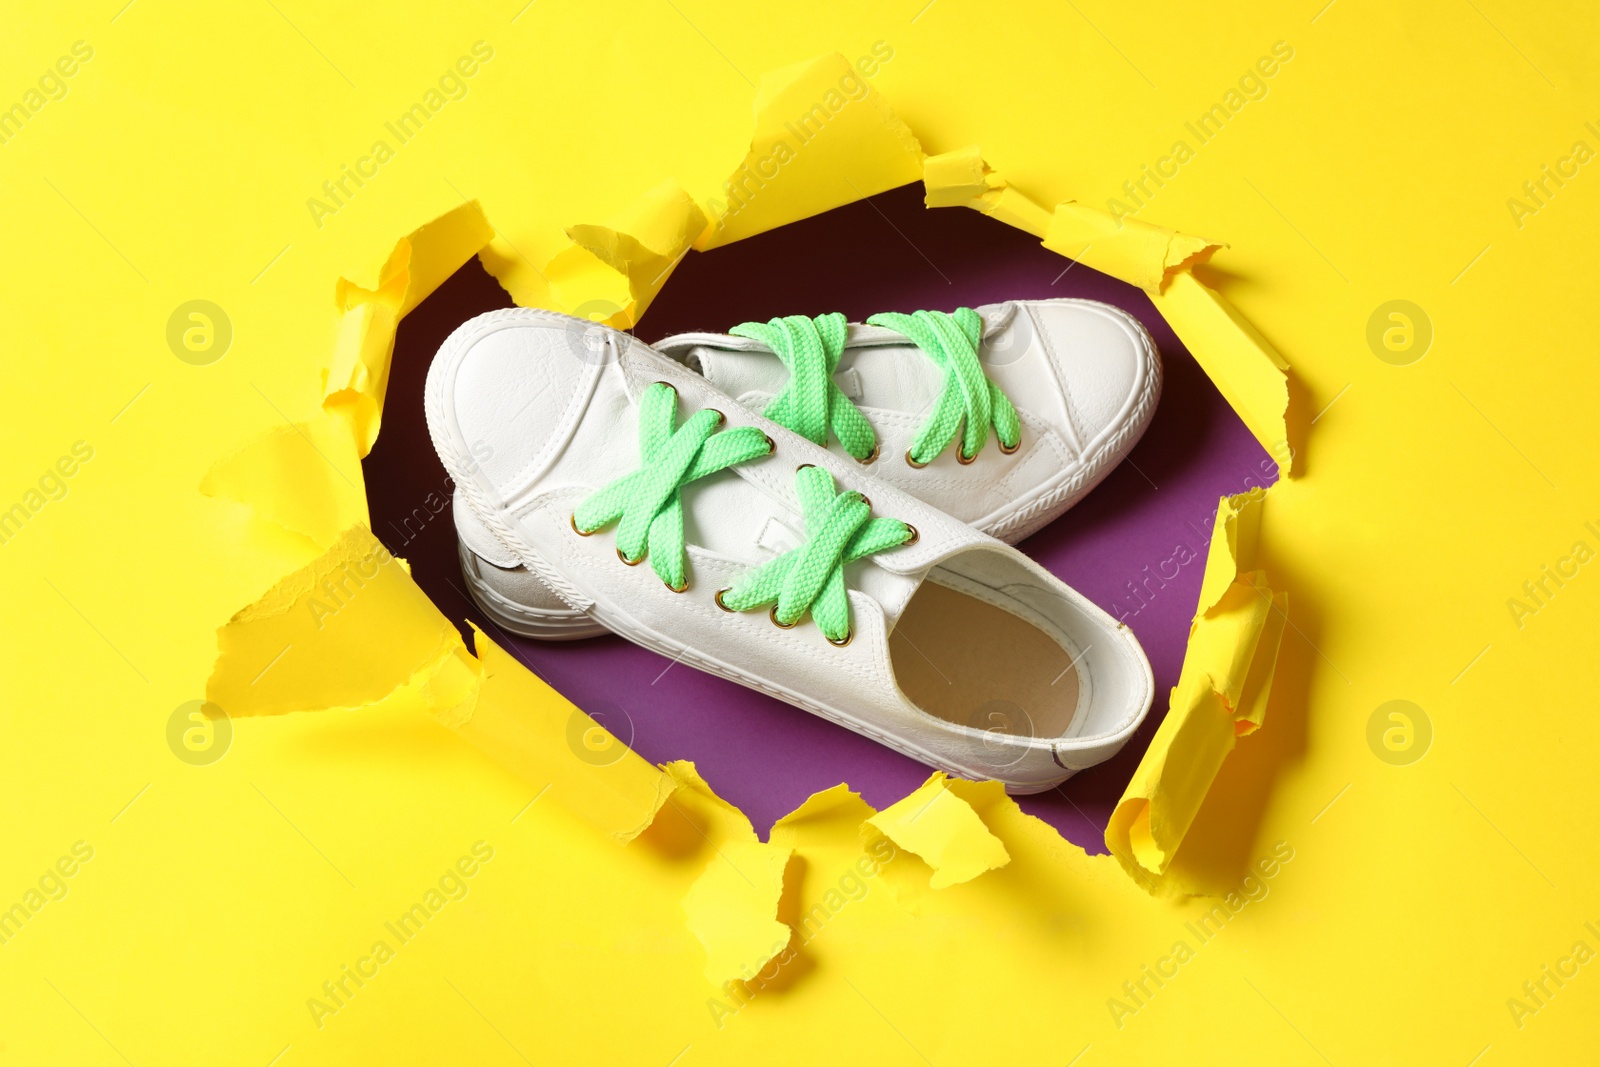 Photo of Stylish sneakers with shoe laces on purple background, view through hole in torn yellow paper